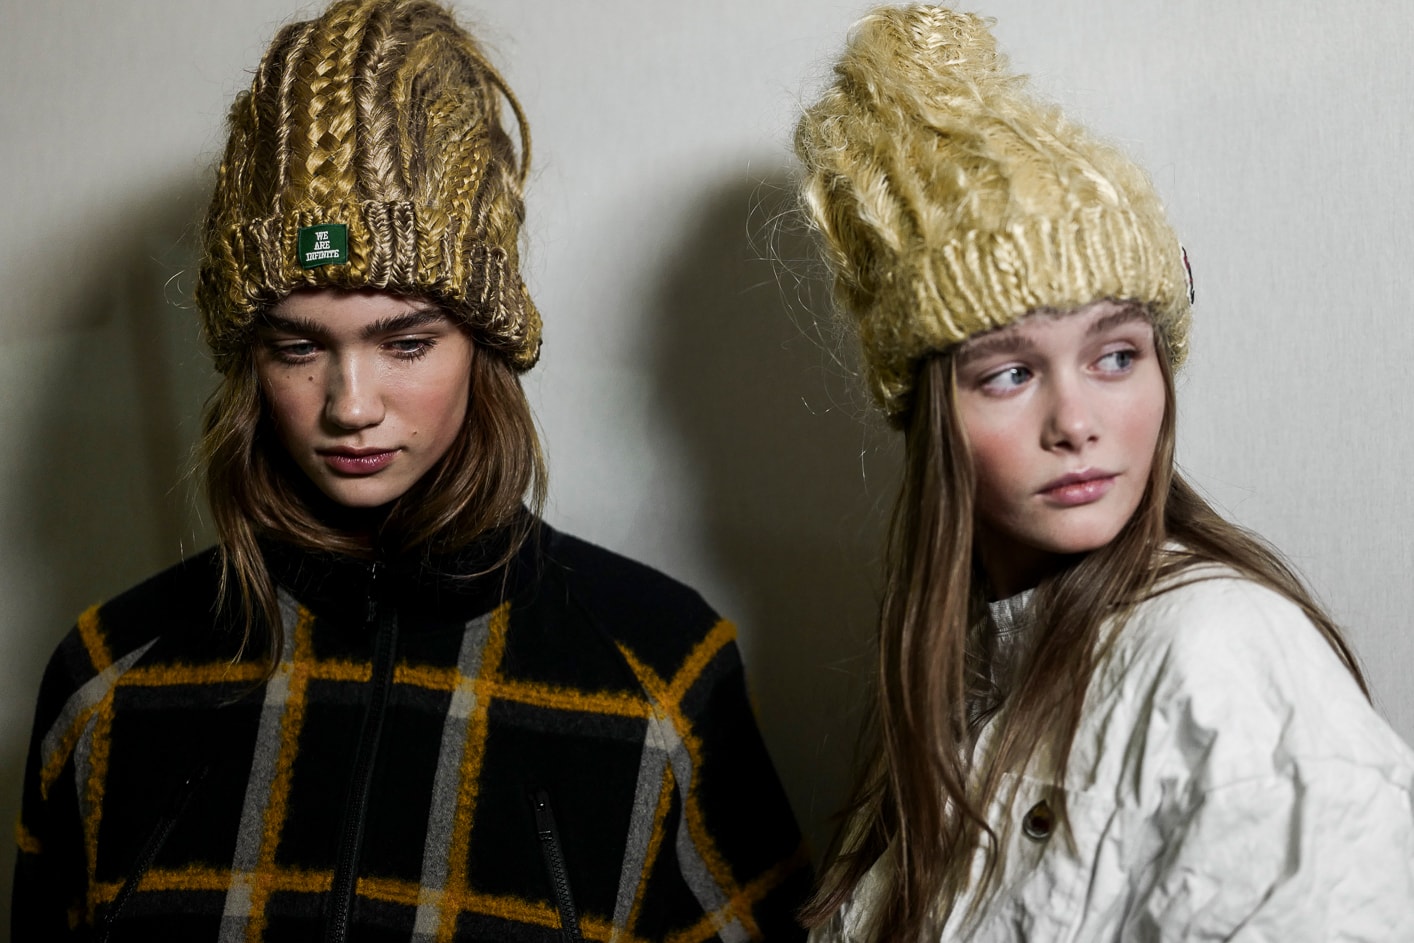 Undercover Fall Winter 2018 Paris Fashion Week Show Backstage